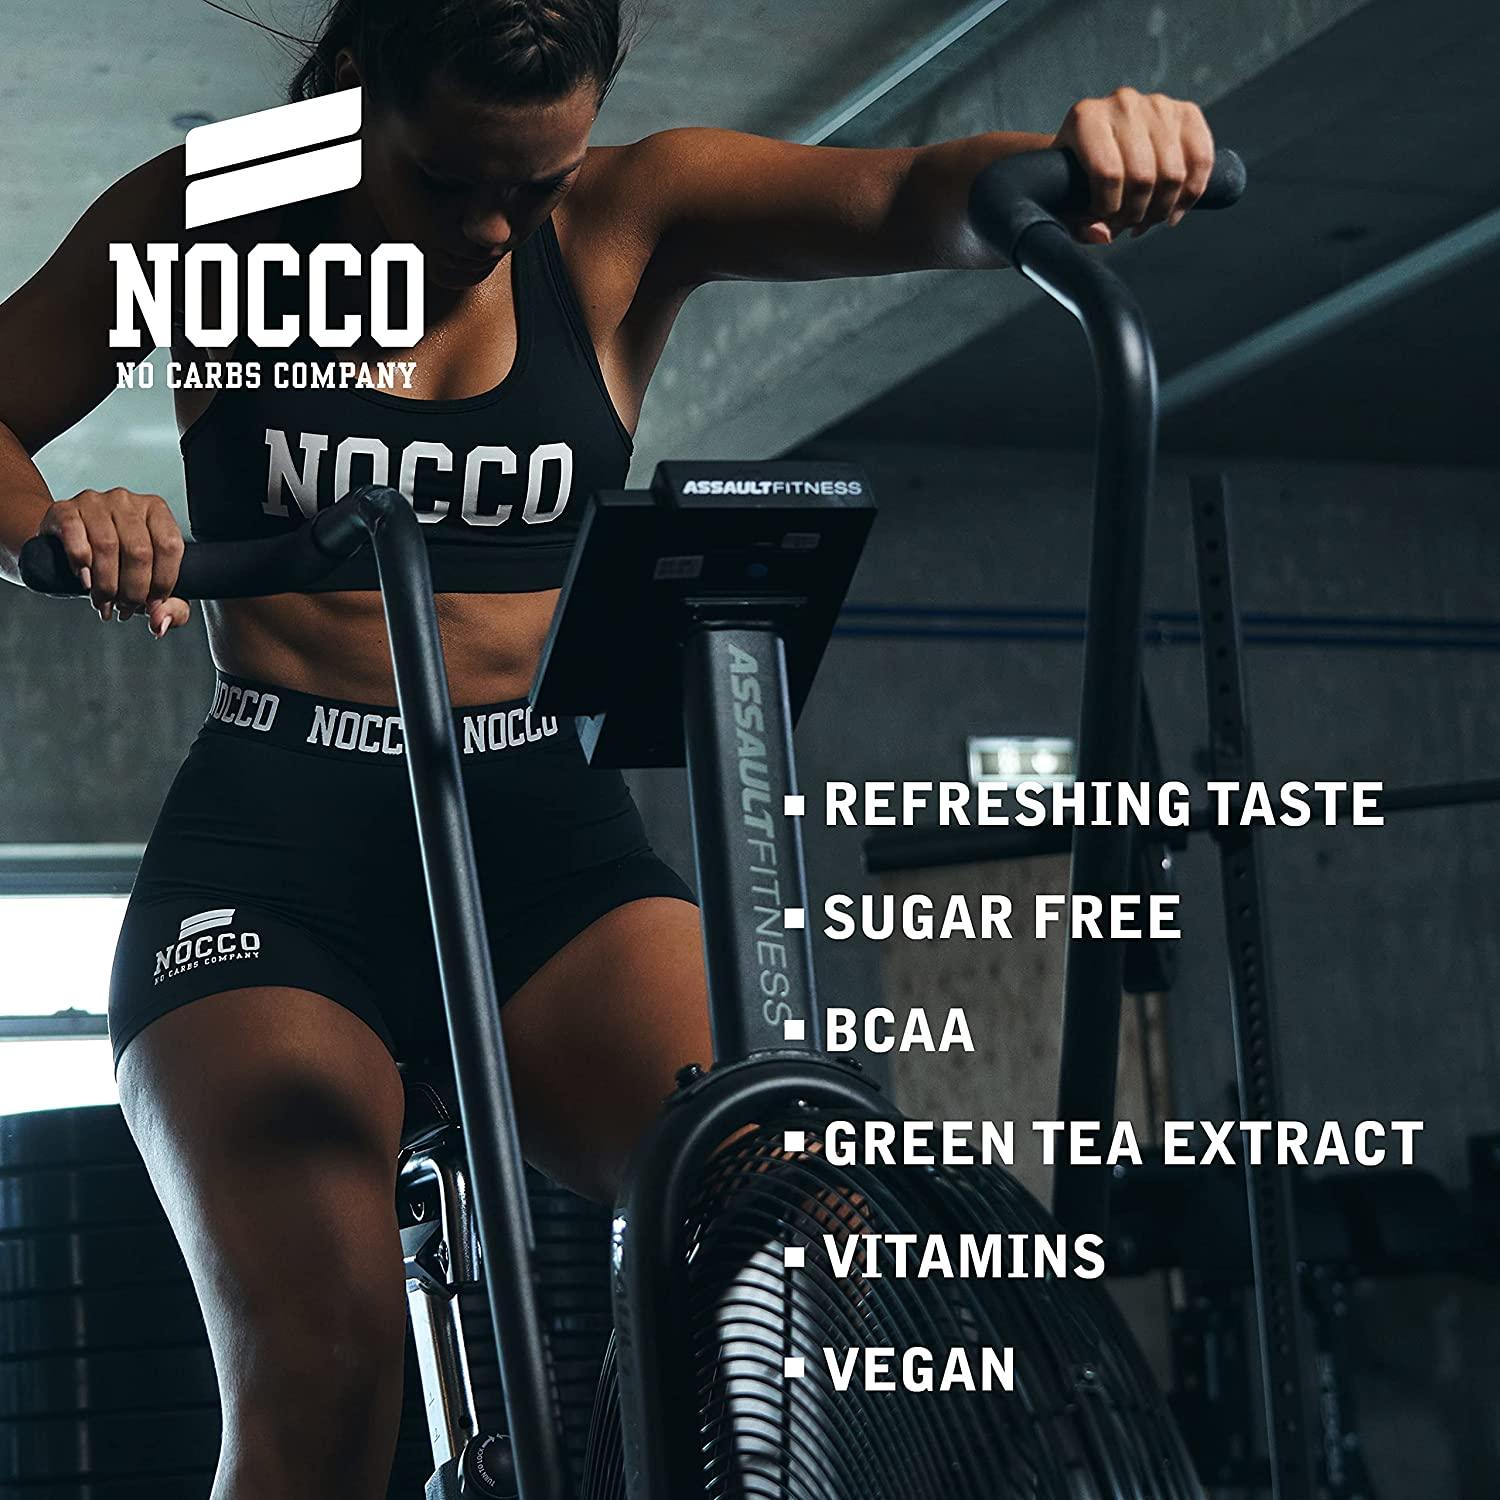 NOCCO Energy Drink | BCAA, 180mg Caffeine sugar free drinks fizzy drinks 12 x 330ml (Limon Del Sol) - Vending Superstore